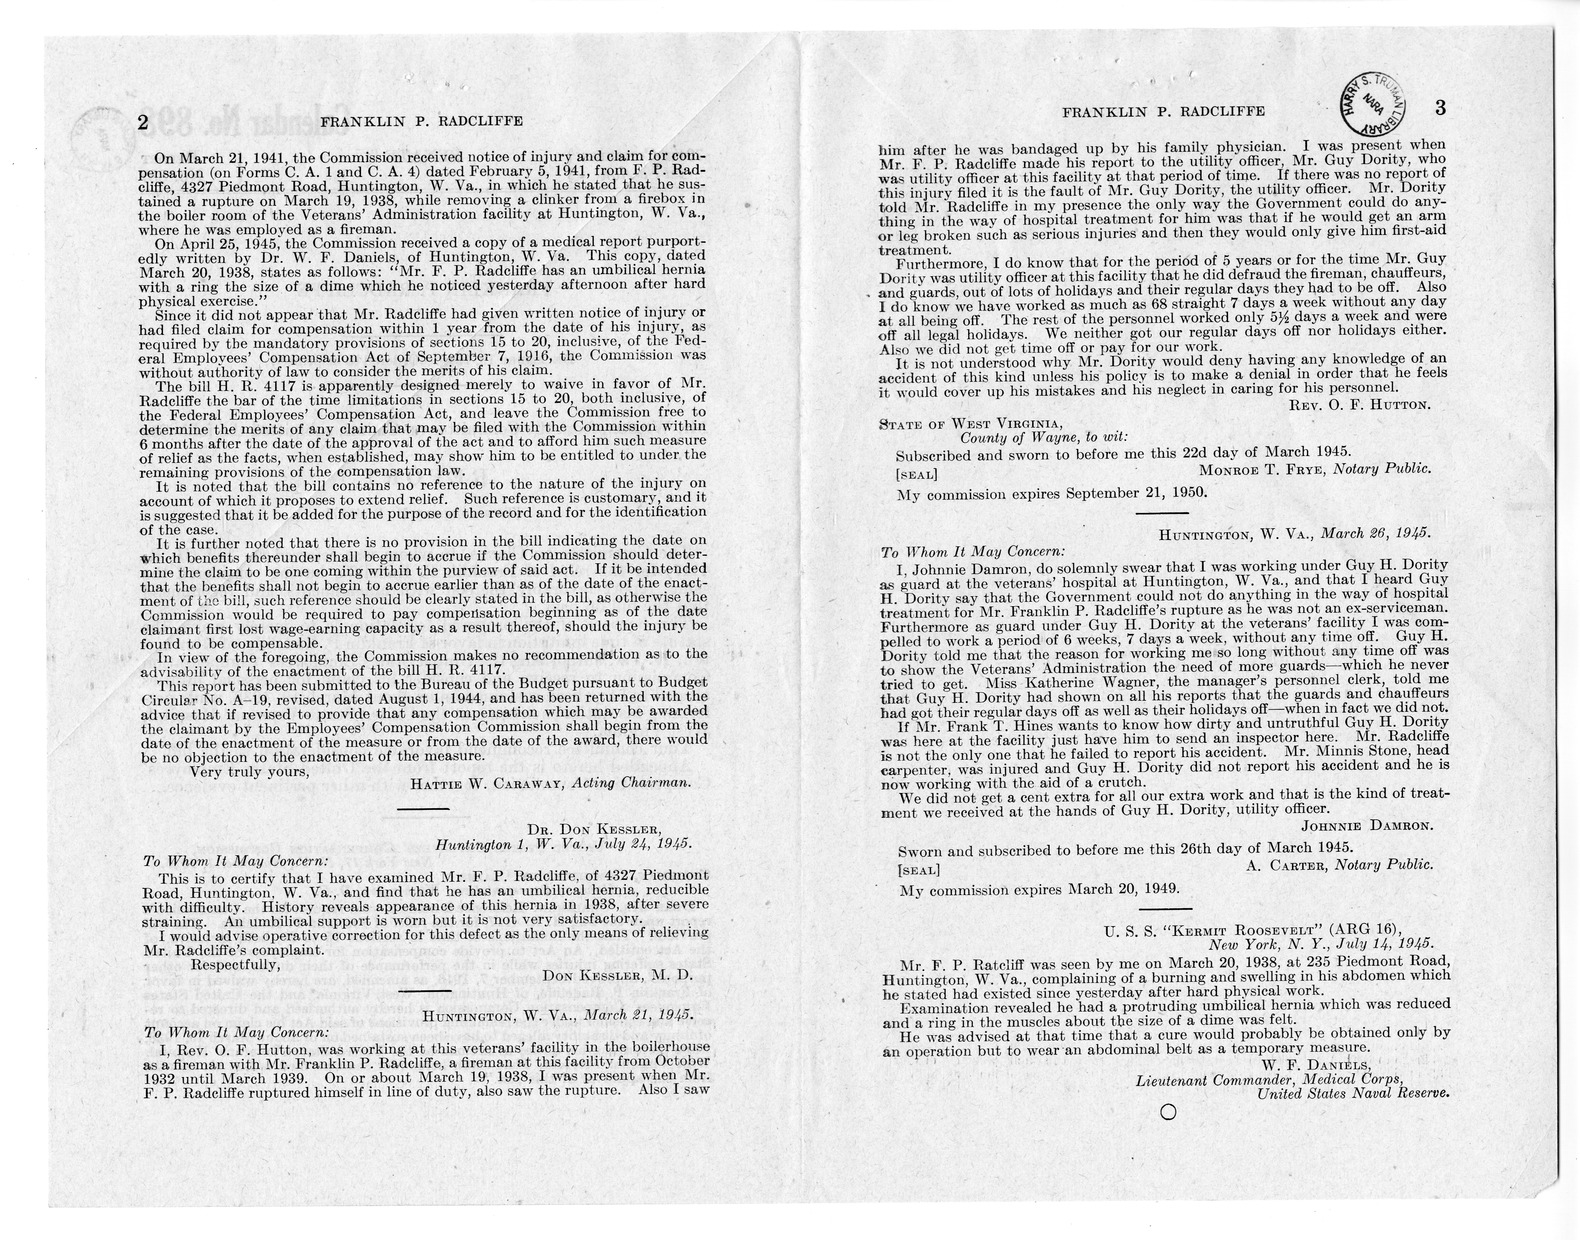 Memorandum from Frederick J. Bailey to M. C. Latta, H.R. 4117, For the Relief of Franklin P. Radcliffe, with Attachments